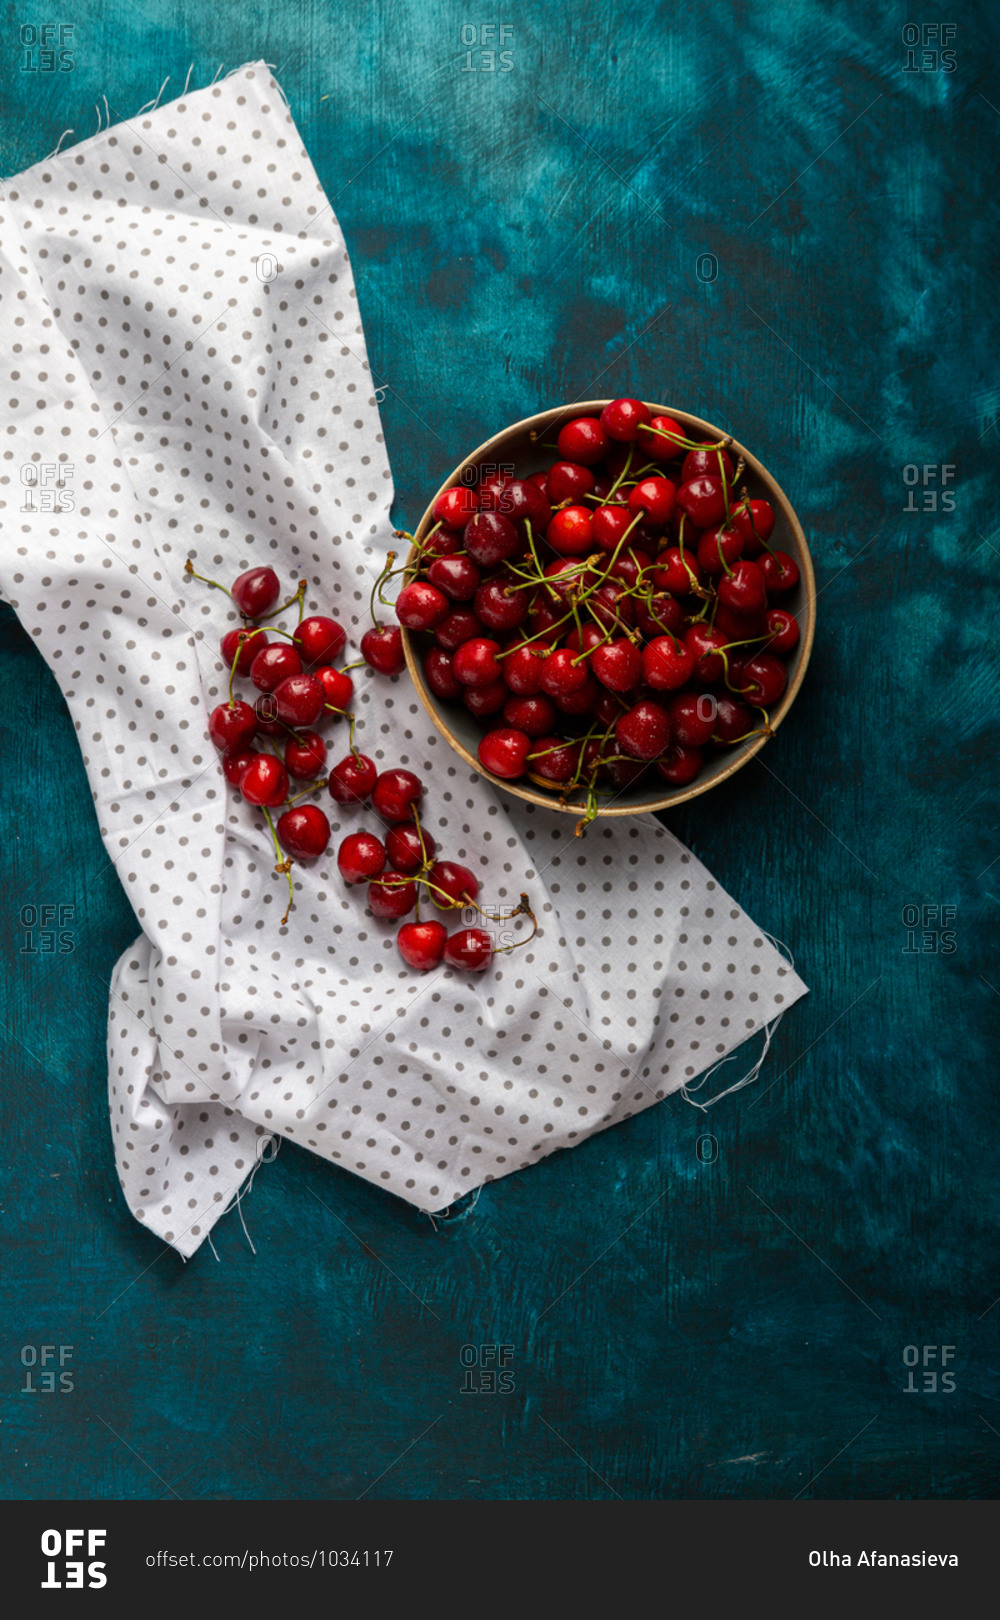 Overhead view of cherries in a bowl